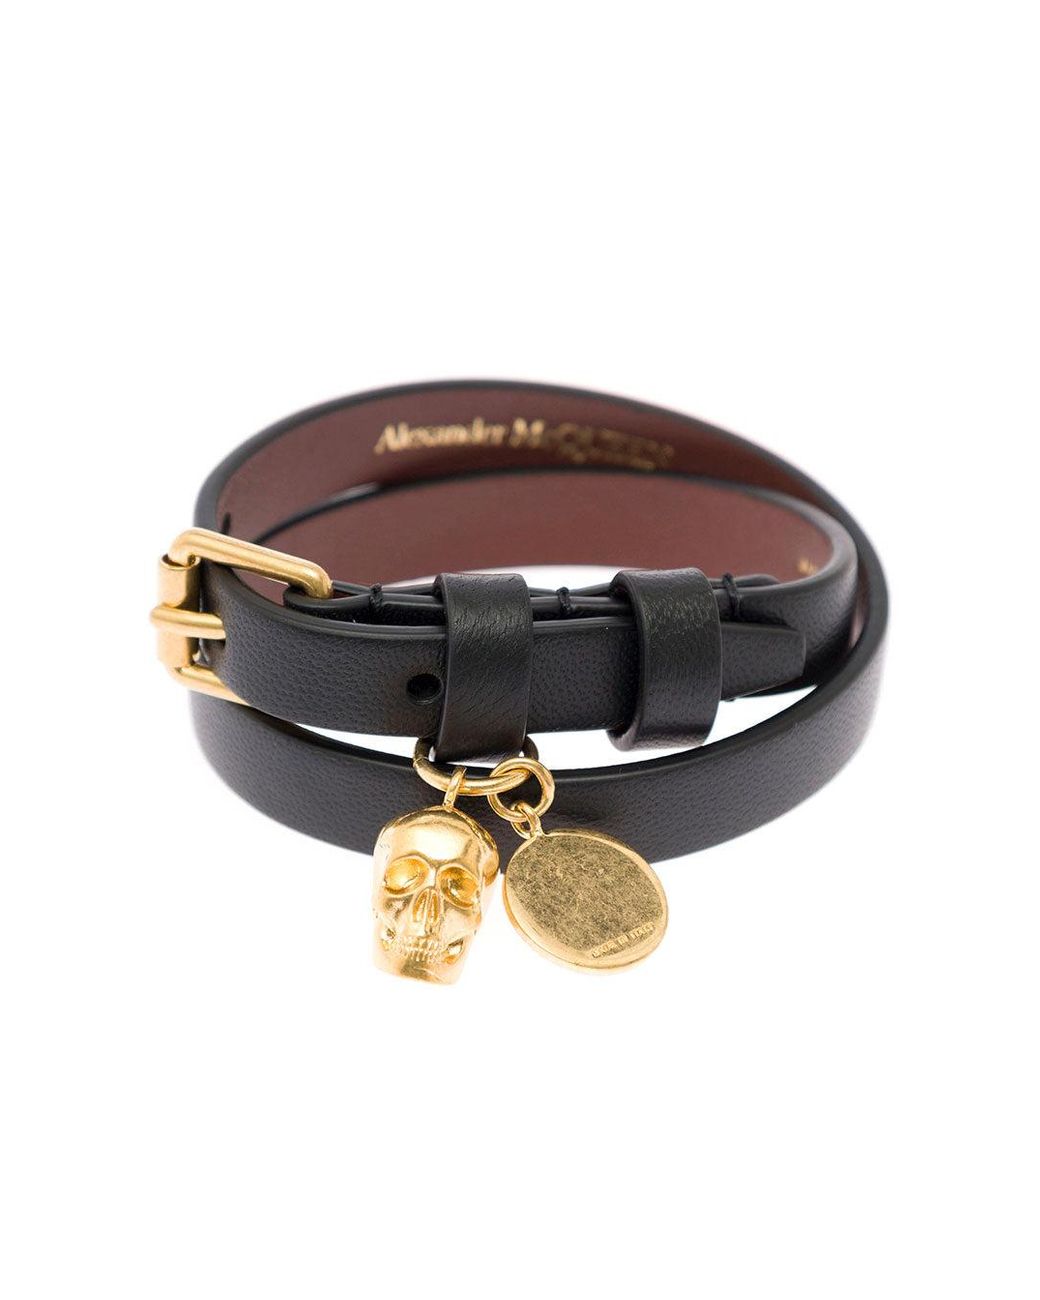 Save 15% Alexander McQueen Alexander Mc Queen Womans Double Wrap Leather Bracelet With Skull Detail in Black Womens Jewellery 